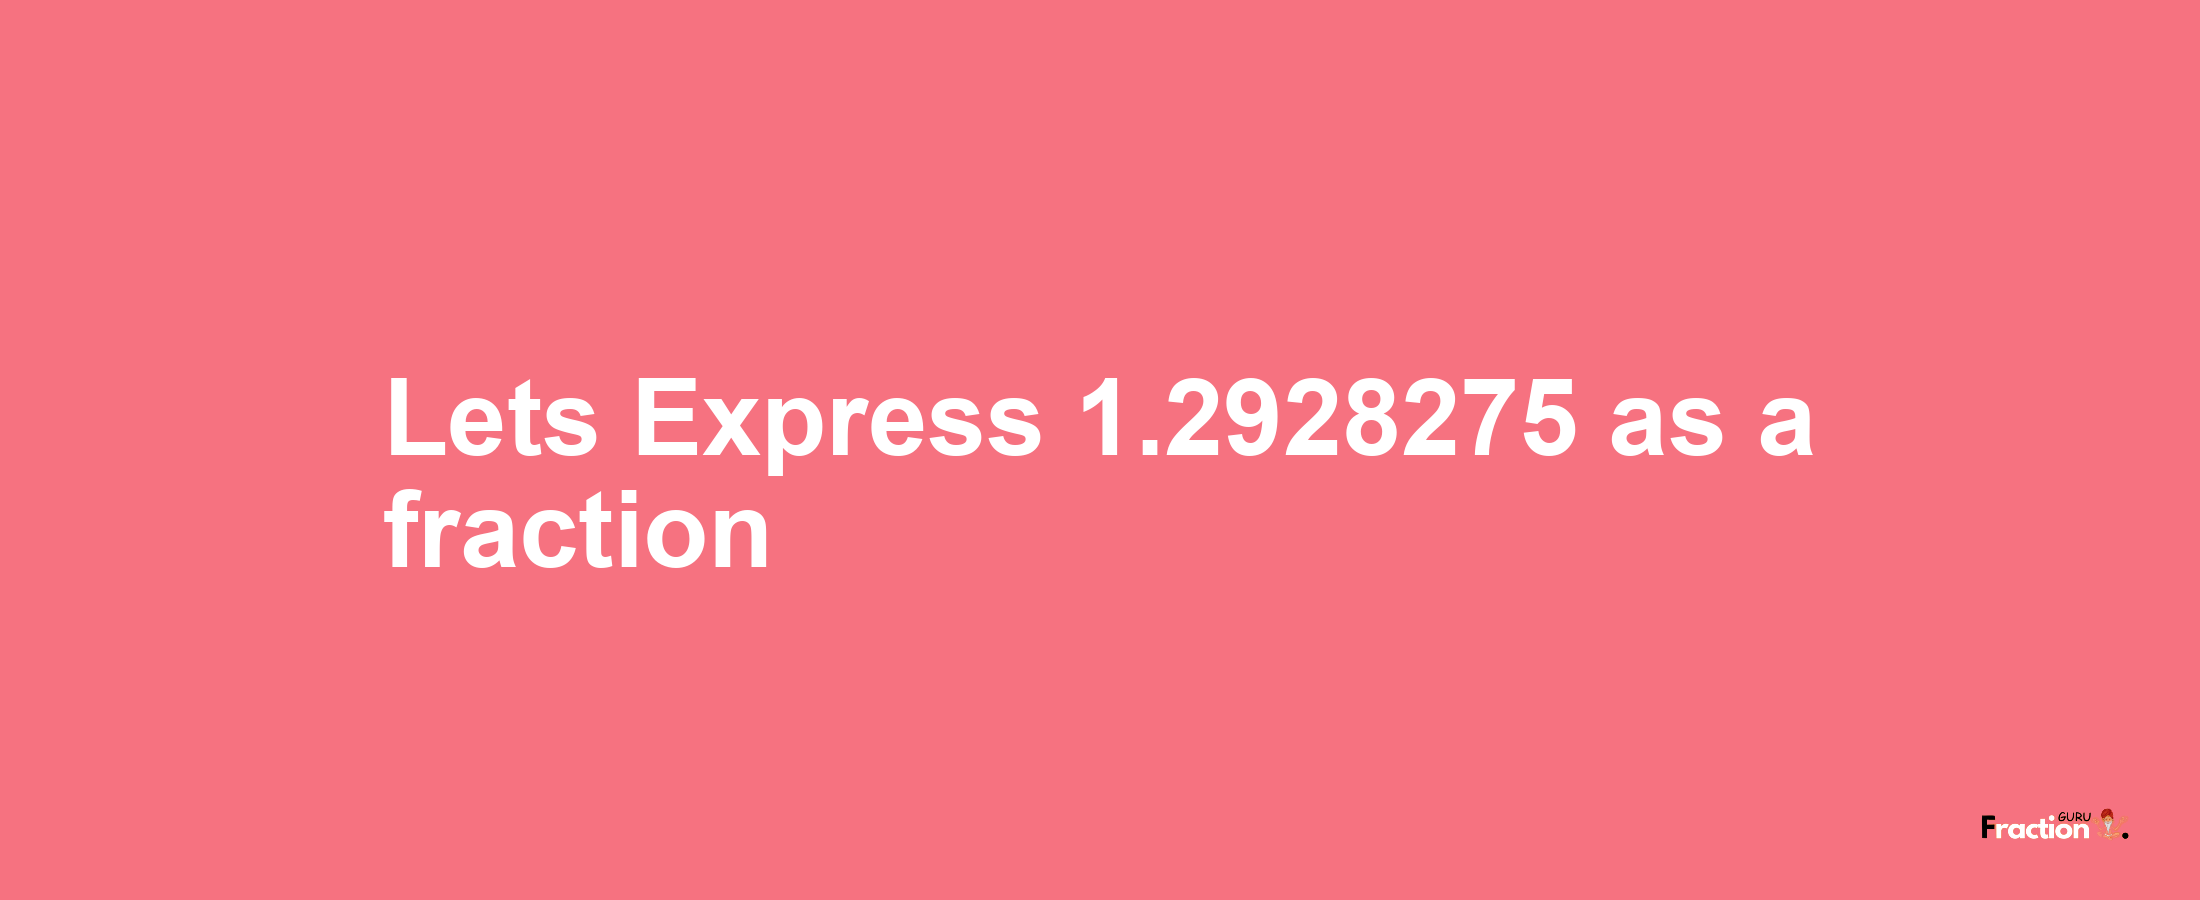 Lets Express 1.2928275 as afraction